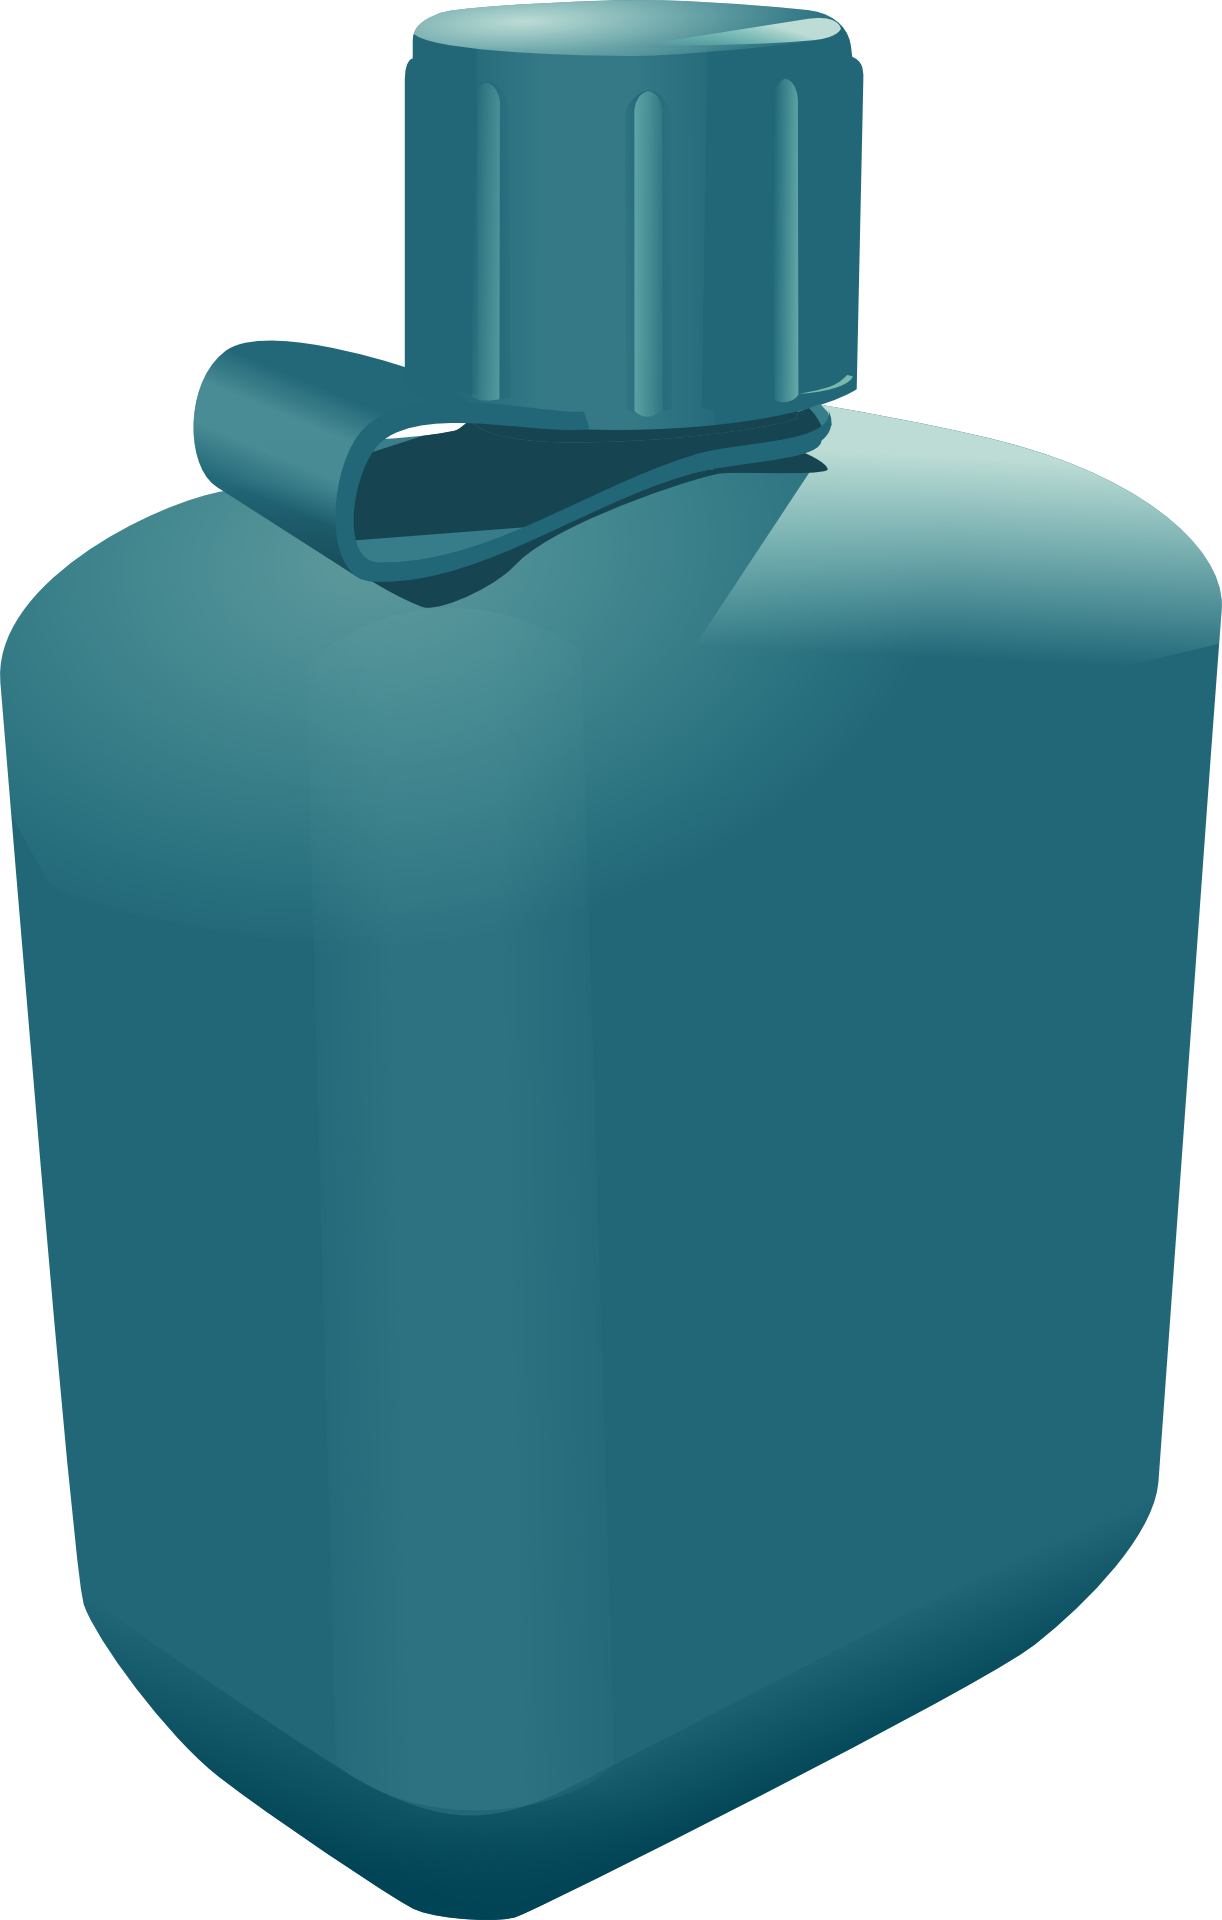 Free To Use Public Domain Clip Art Page - Water Container Clipart (1527x2400)